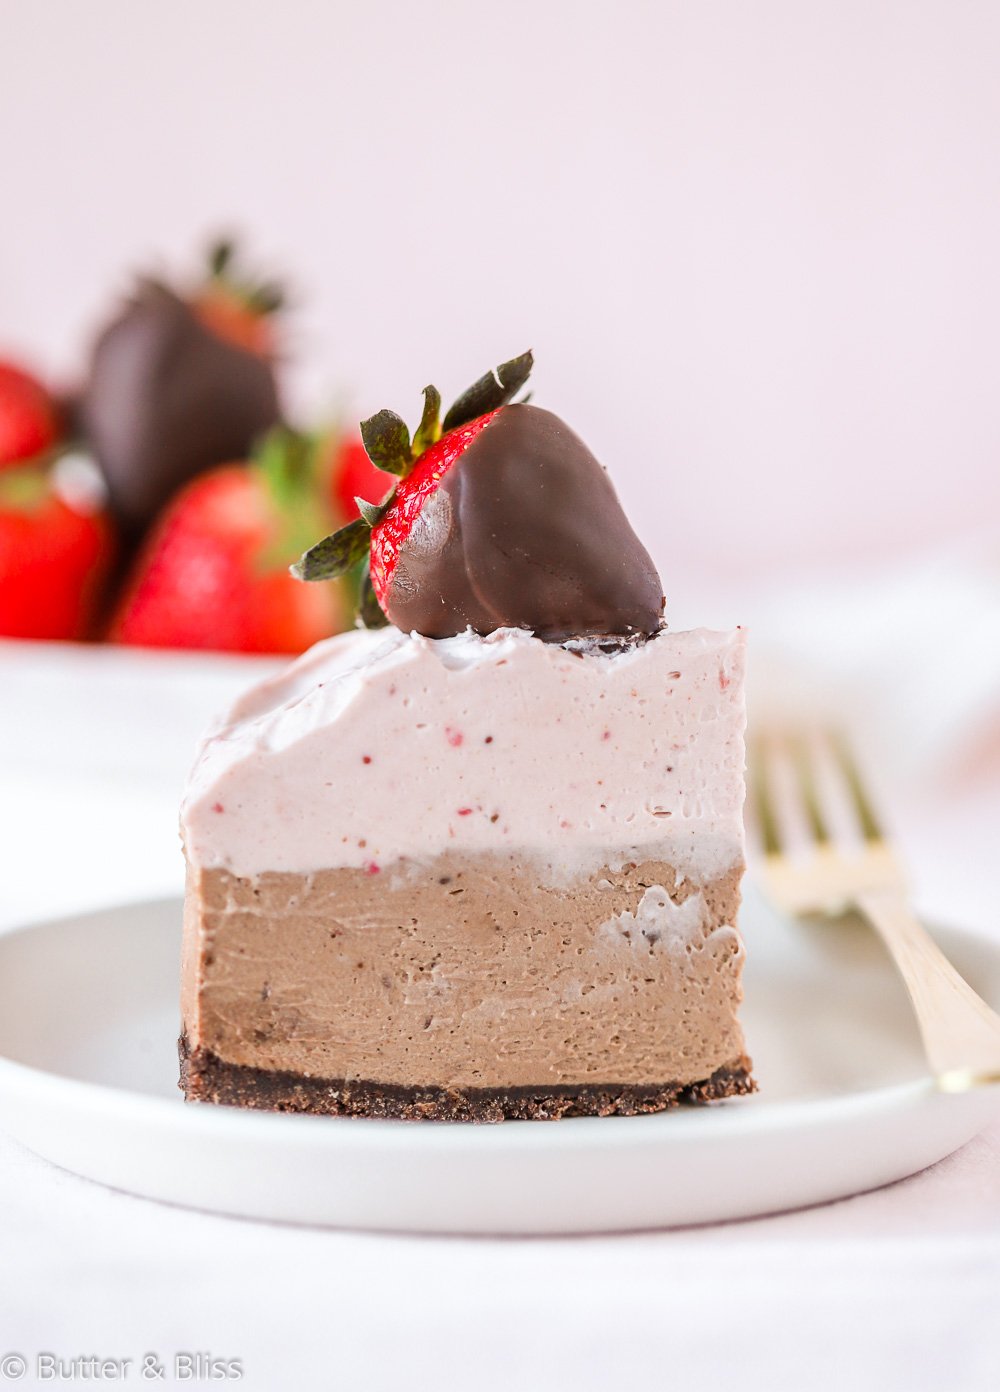 Single slice of chocolate mousse cheesecake for Valentine's Day 